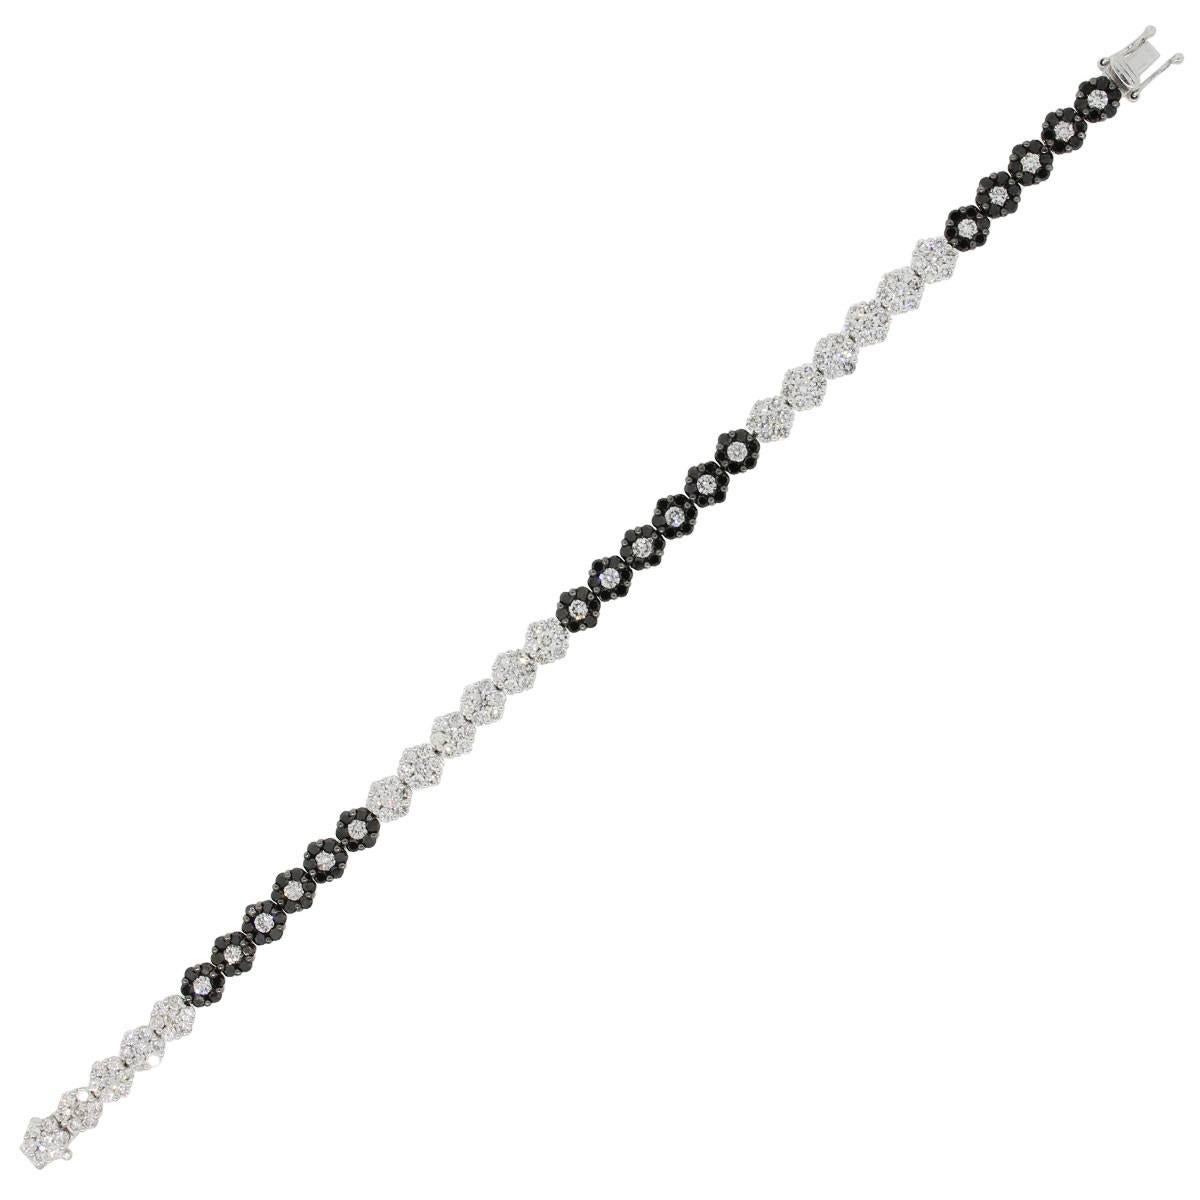 Material: 18k white gold
Diamond Details: Approximately 8ctw of round brilliant diamonds. White diamonds are G/H in color and SI in clarity
Bracelet Measurements: 7″ x 0.14″ x 0.26″
Clasp: Tongue in box clasp with double safety latch
Total Weight: